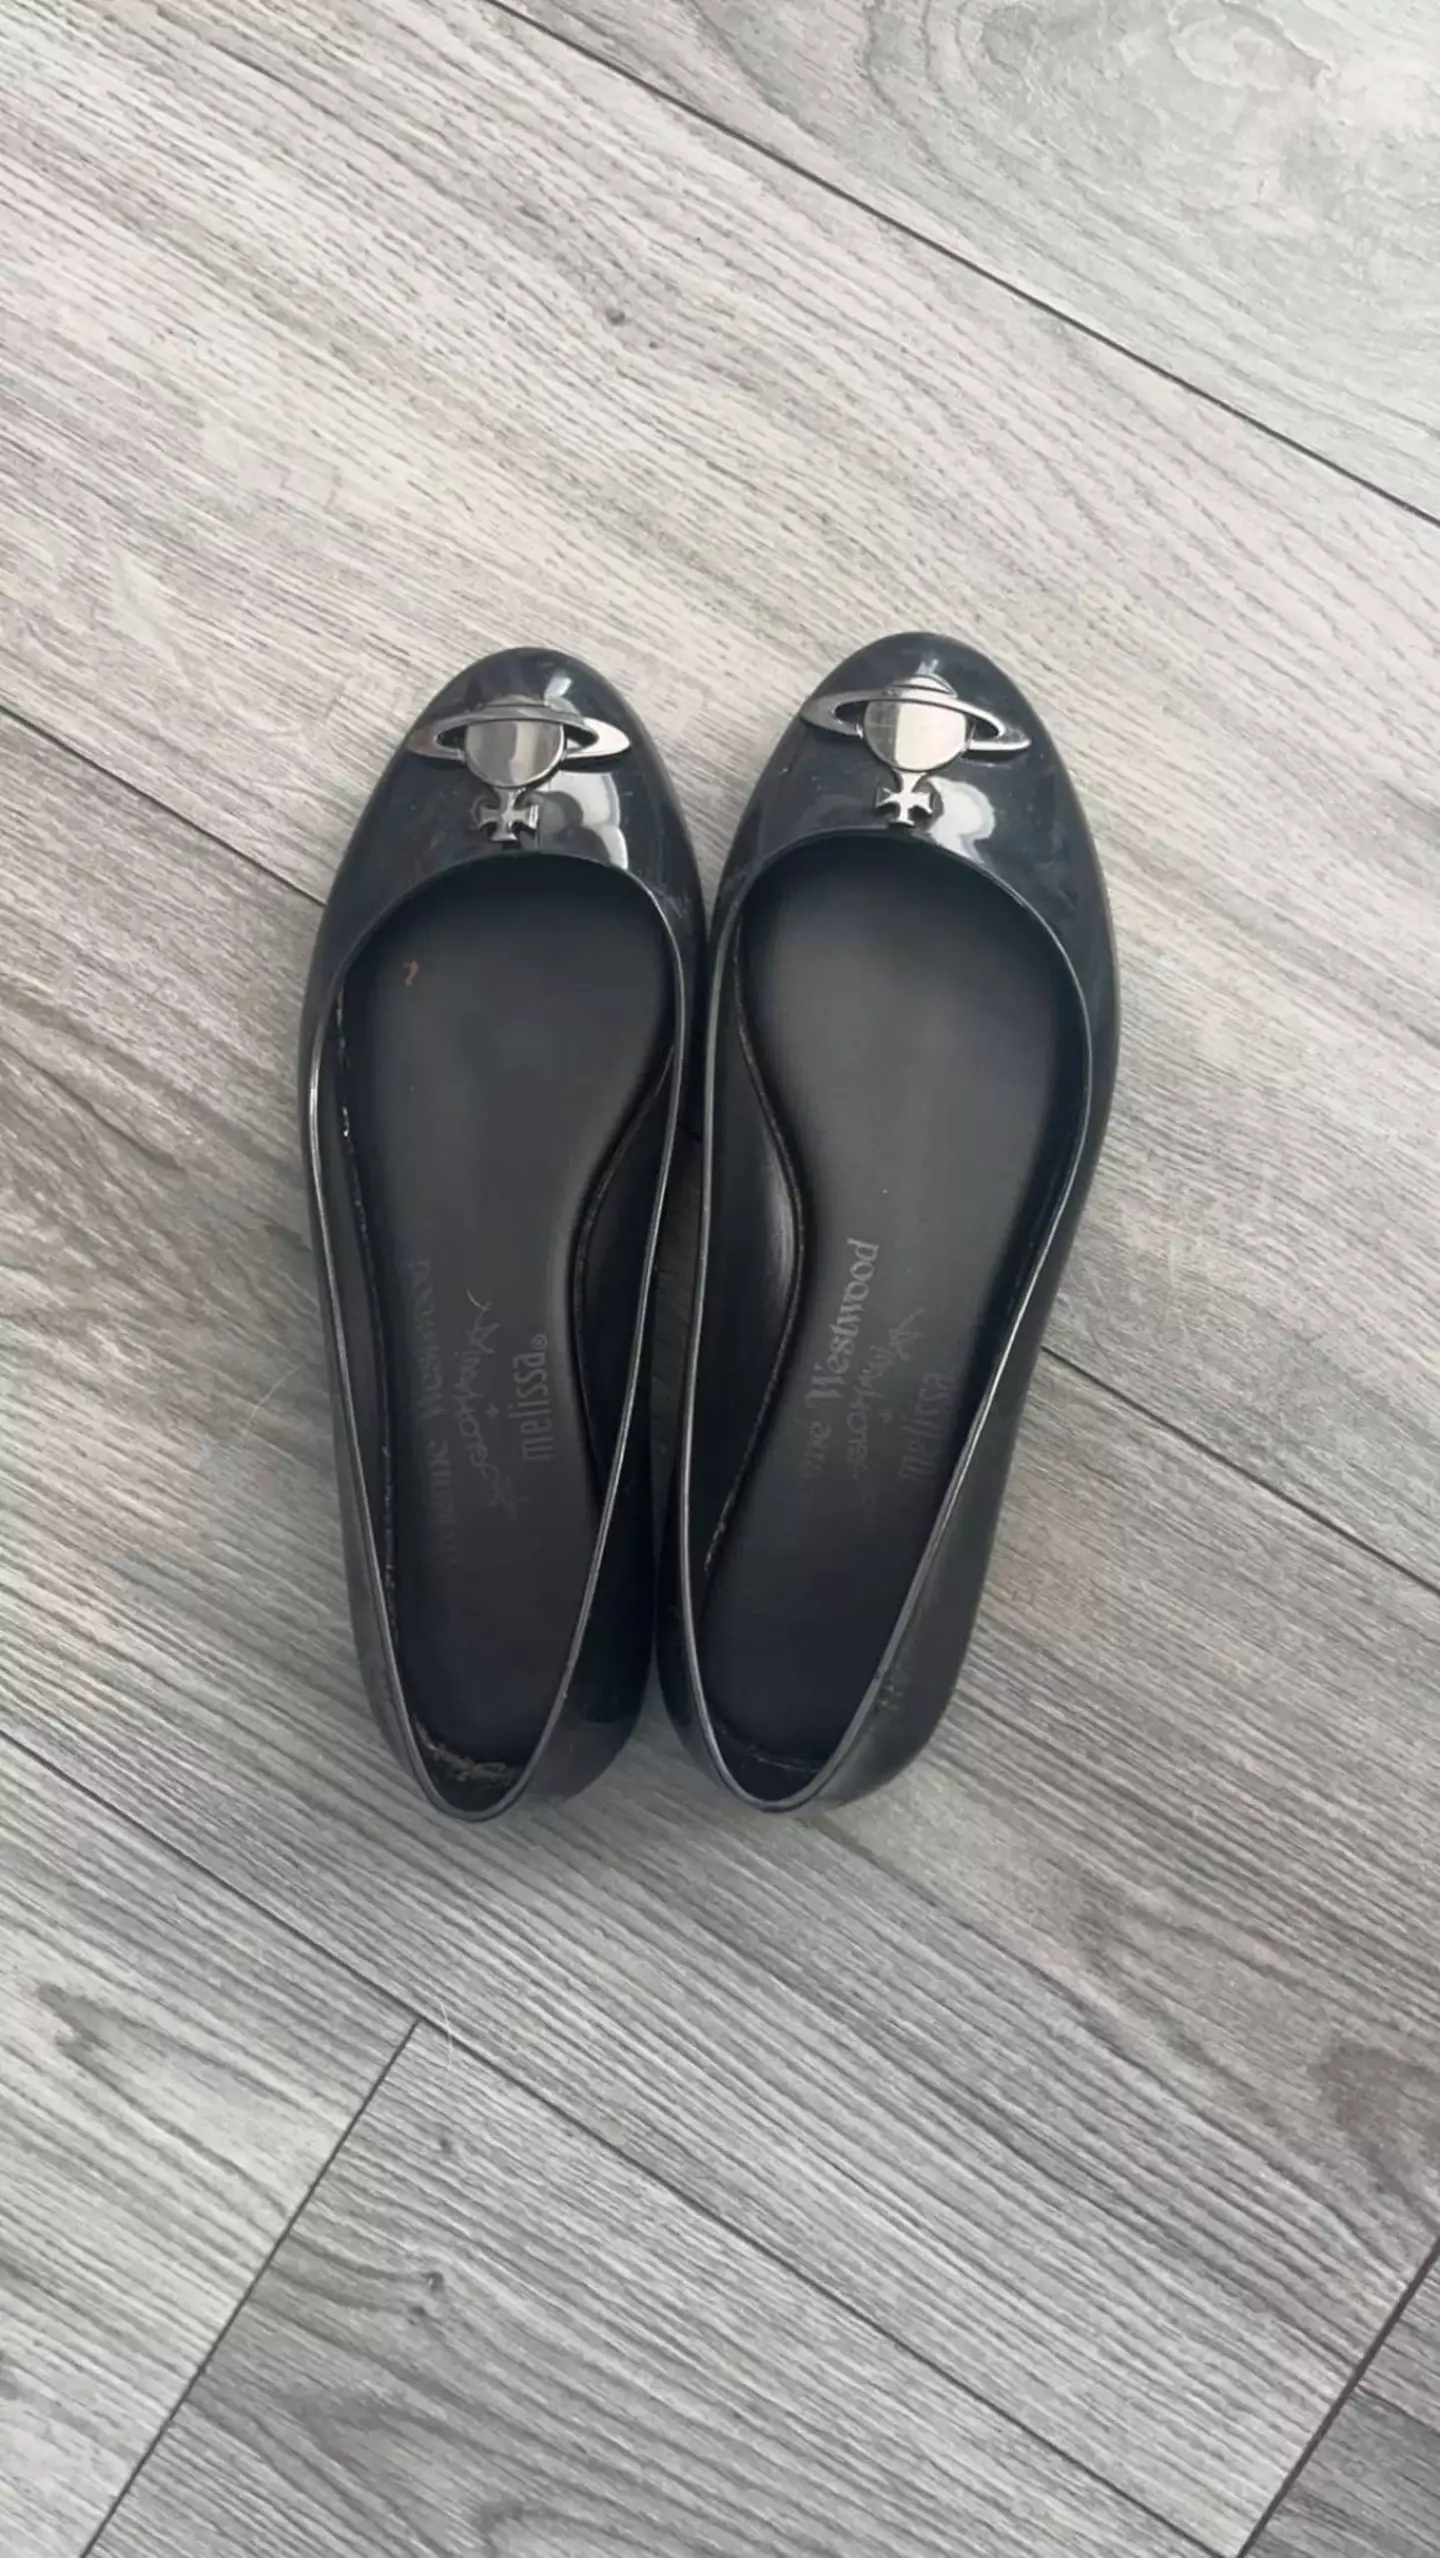 The 11-year-old girl was sent home on her first day of high school becayse of her Vivienne Westwood shoes.